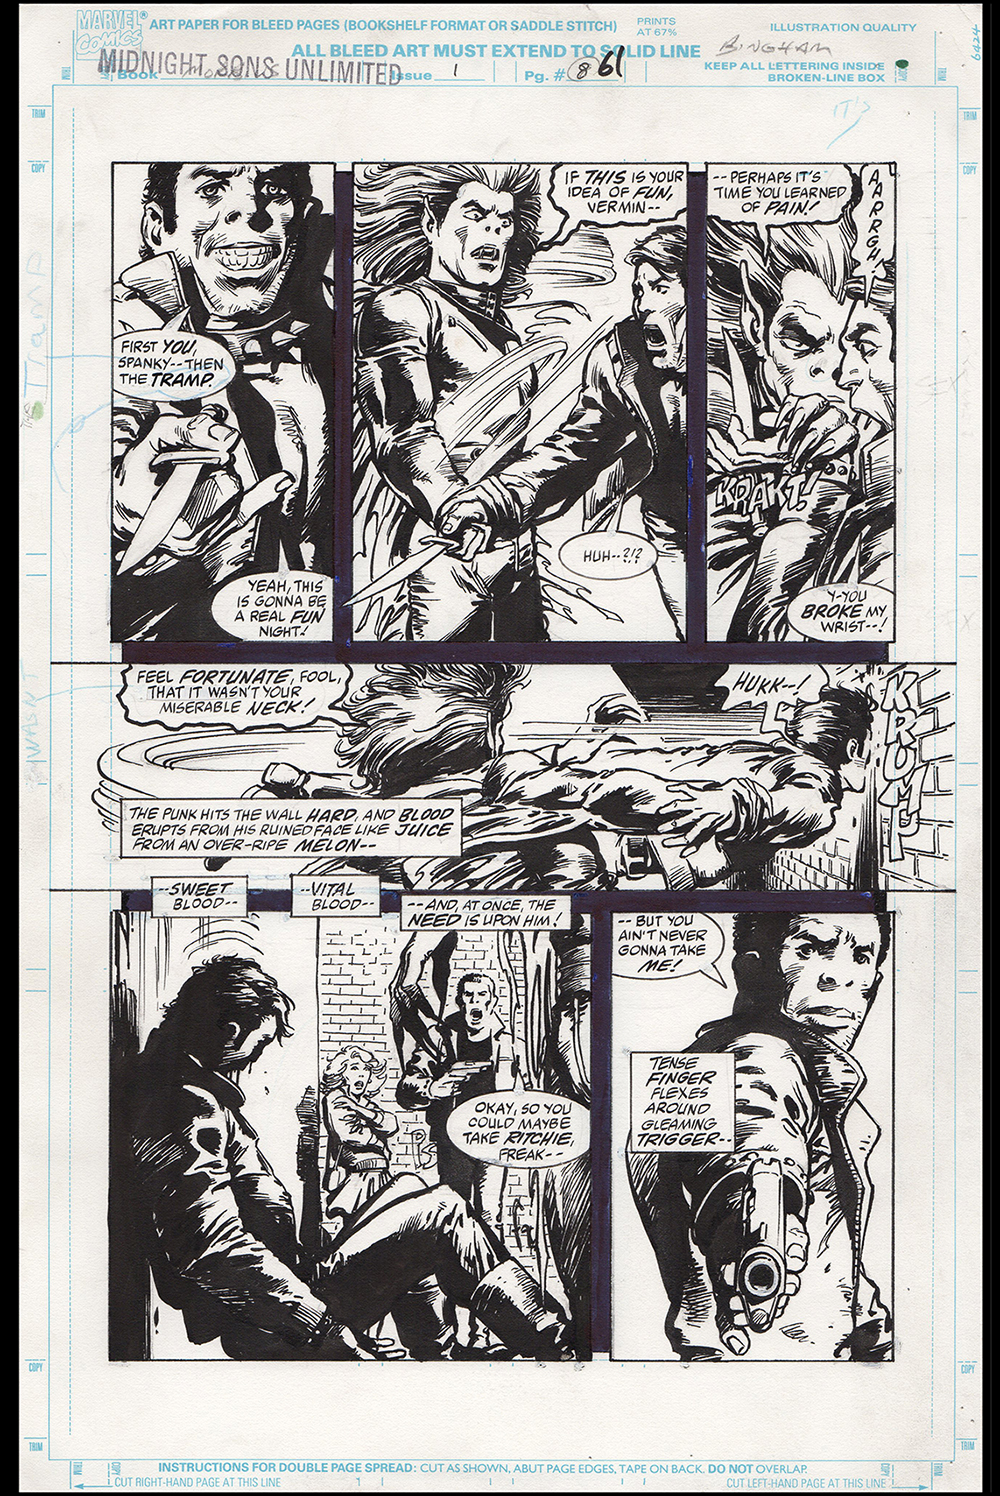 Image: Midnight Sons Unlimited #1 page 61 Art by Jerry Bingham